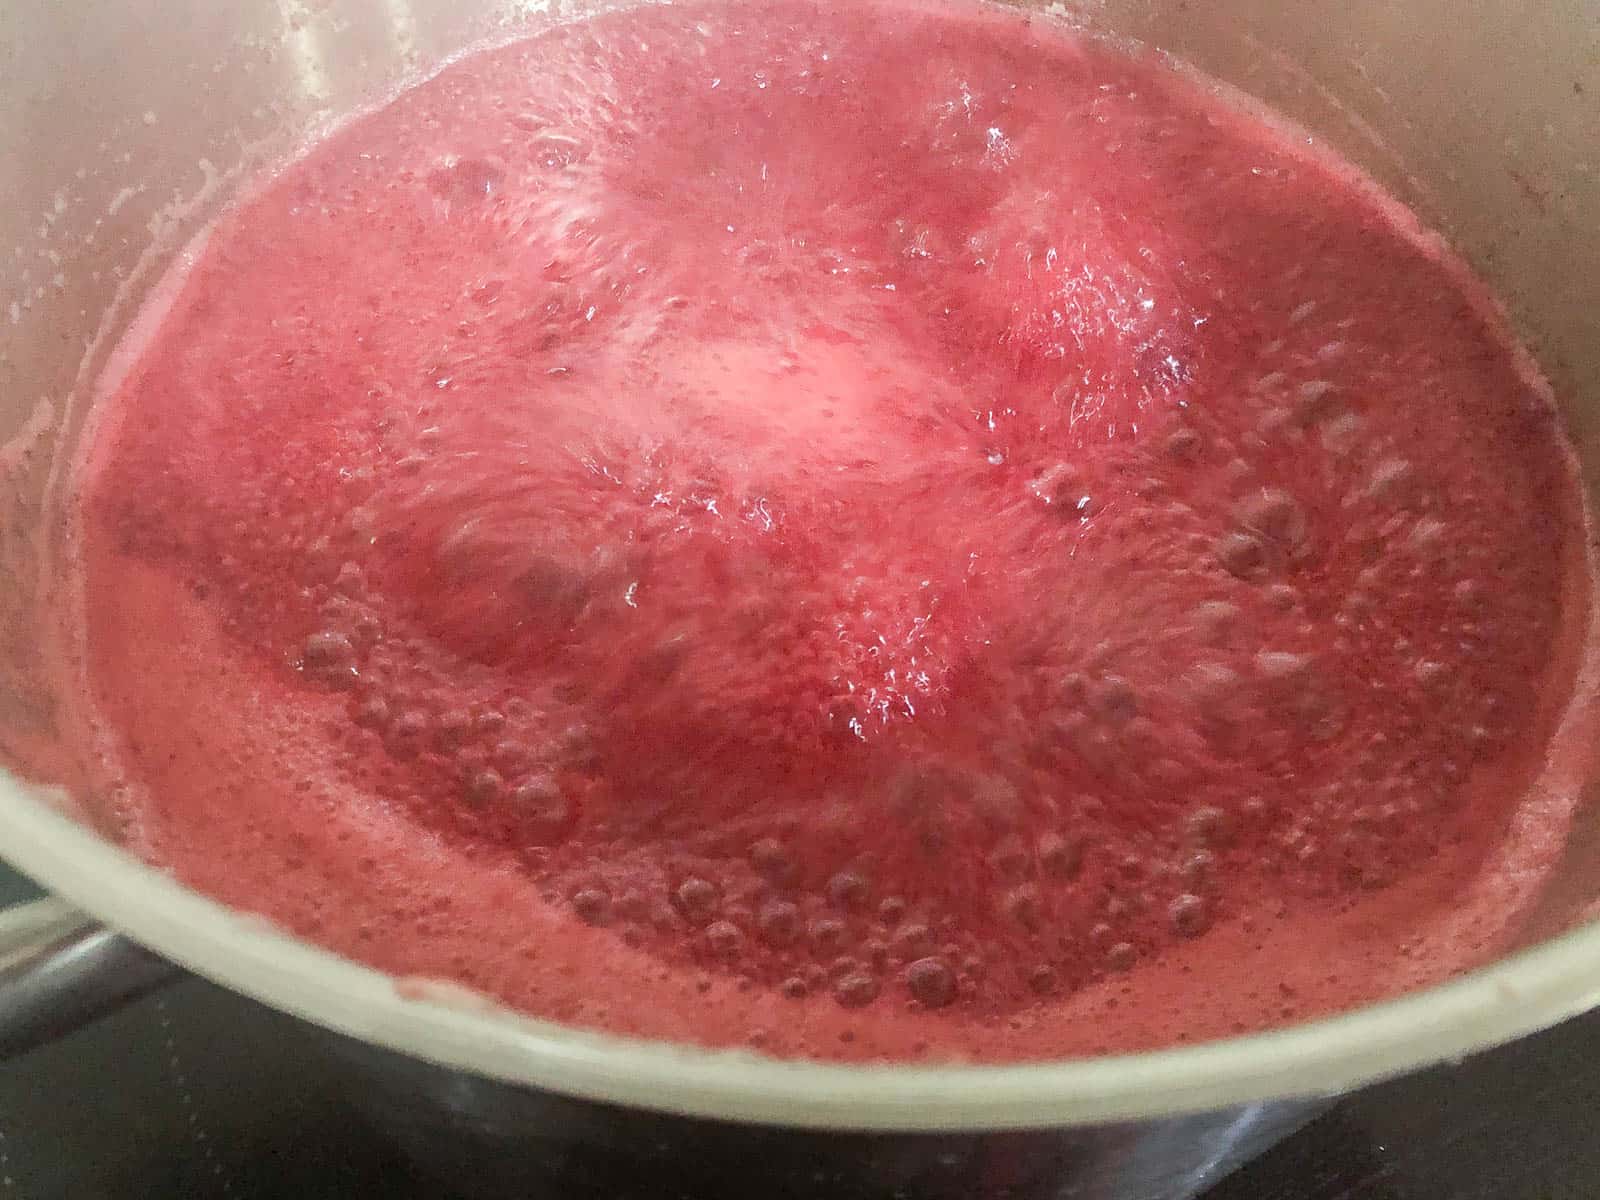 Raspberry jam at the rolling boil stage of jam making process.